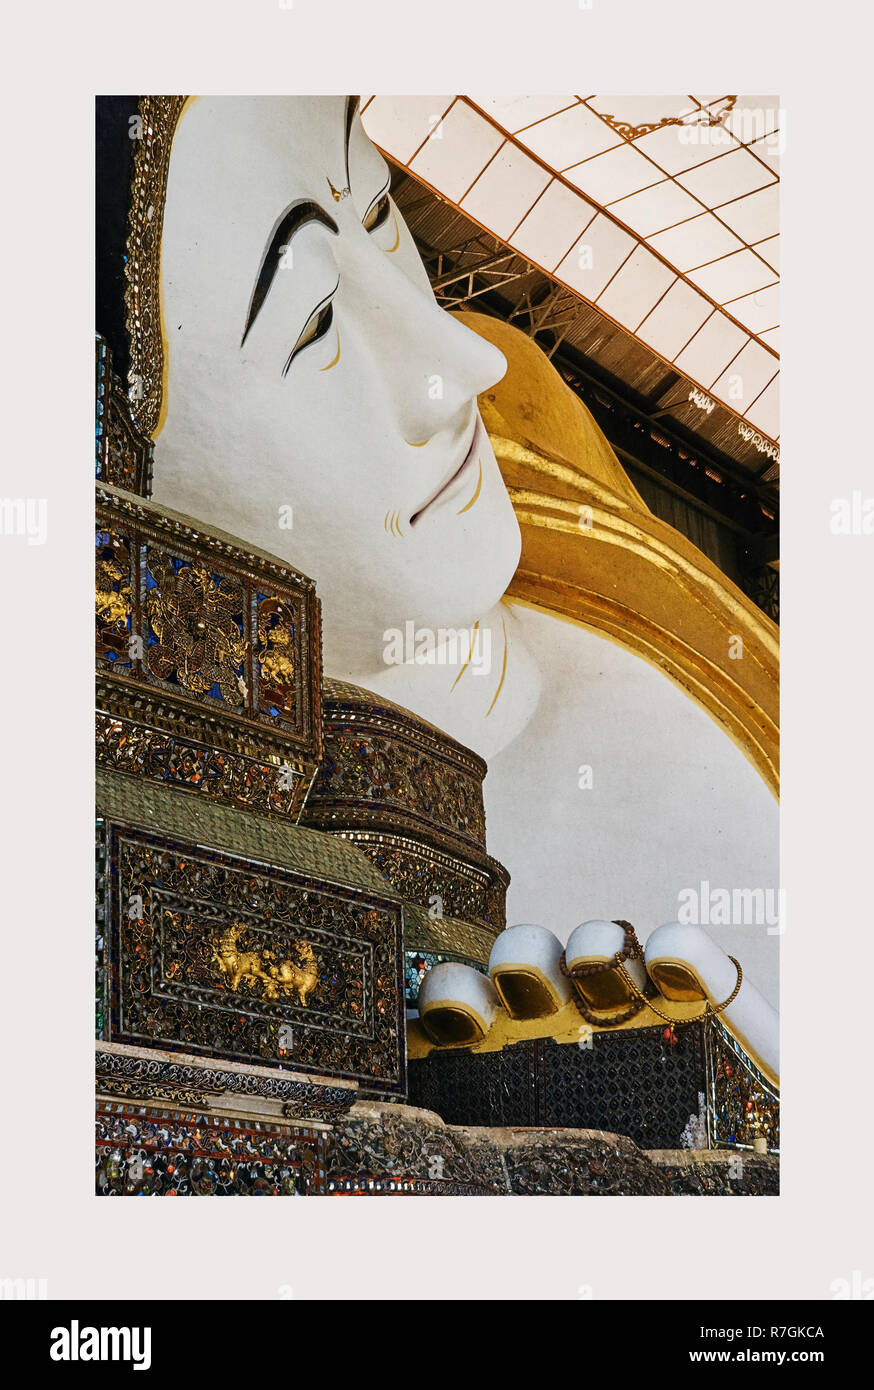 Myanmar, Burma, Pegu, Colossol Buddhas, 1966 or earlier, Lost Cities of Asia, Architecture, Southeast Asia. Stock Photo